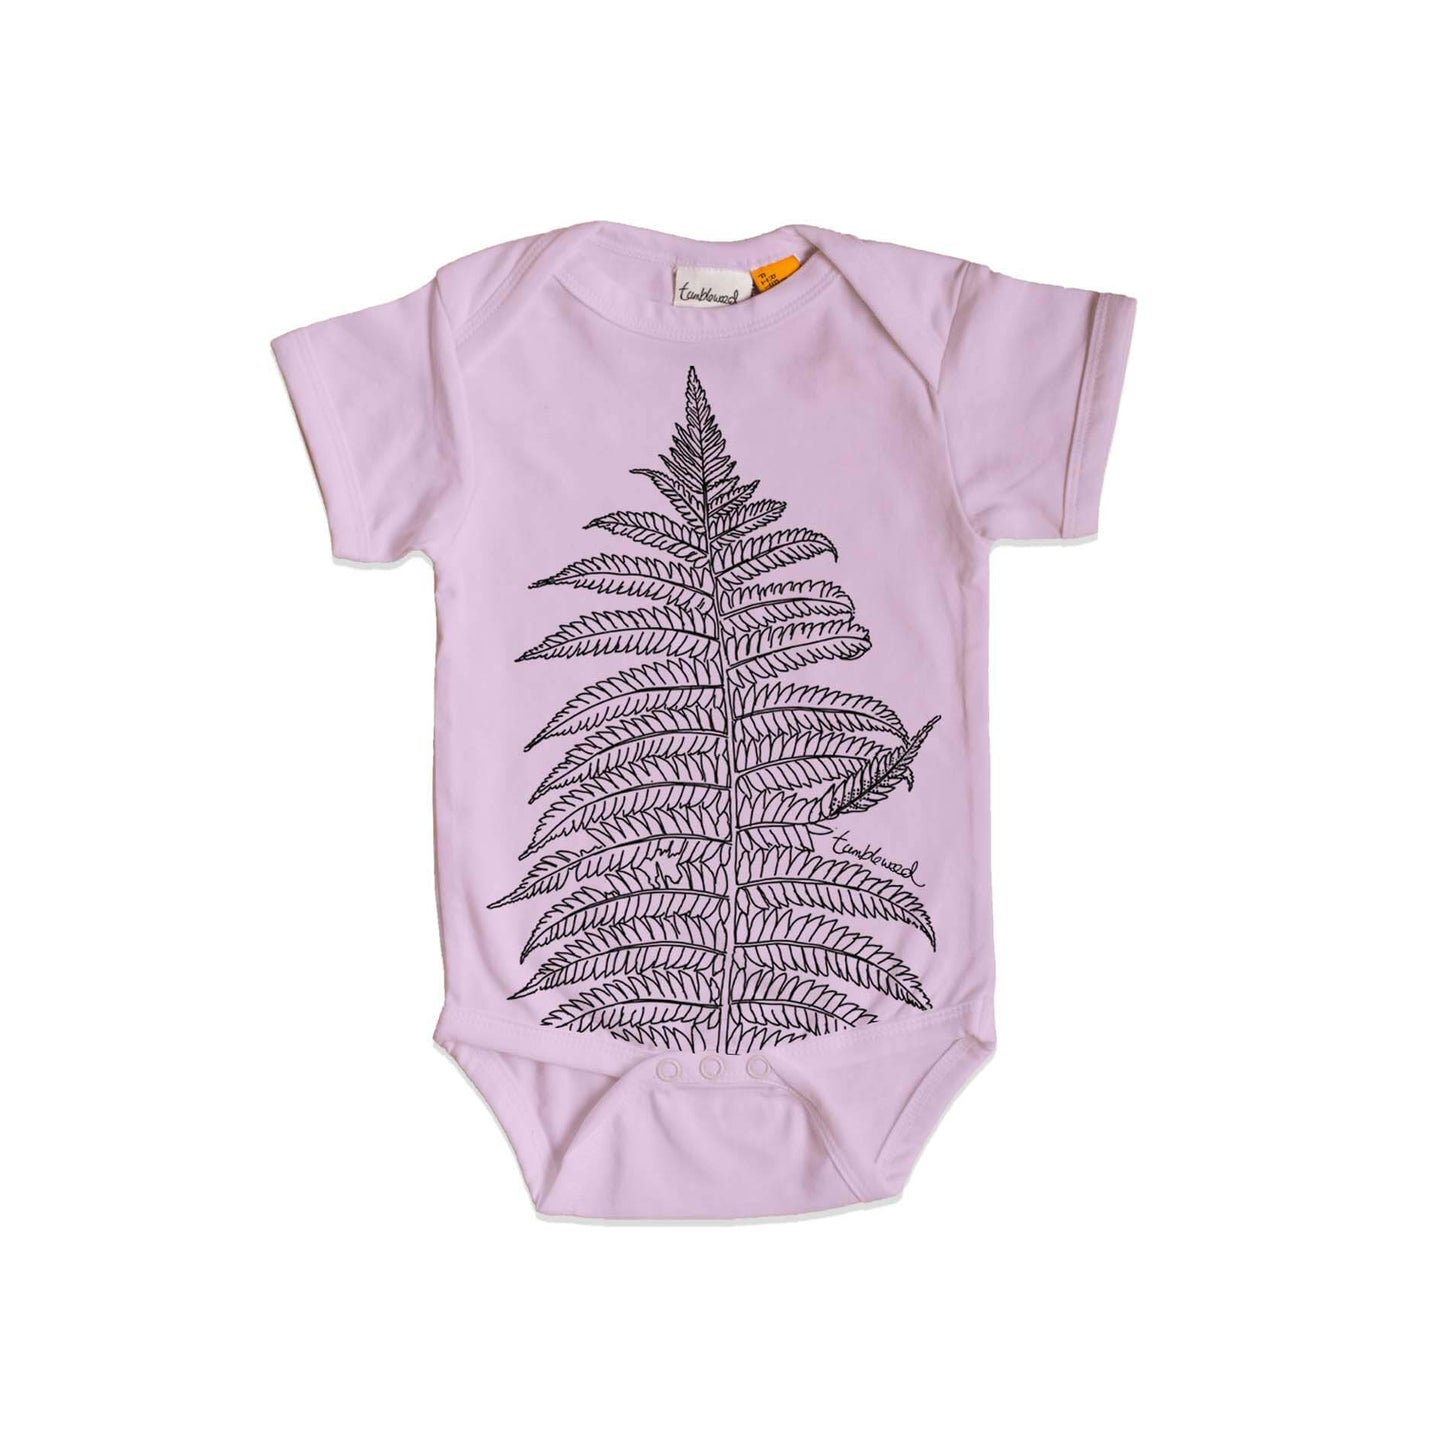 Short sleeved, purple, organic cotton, baby onesie featuring a screen printed Silver fern/ponga design.
 design.